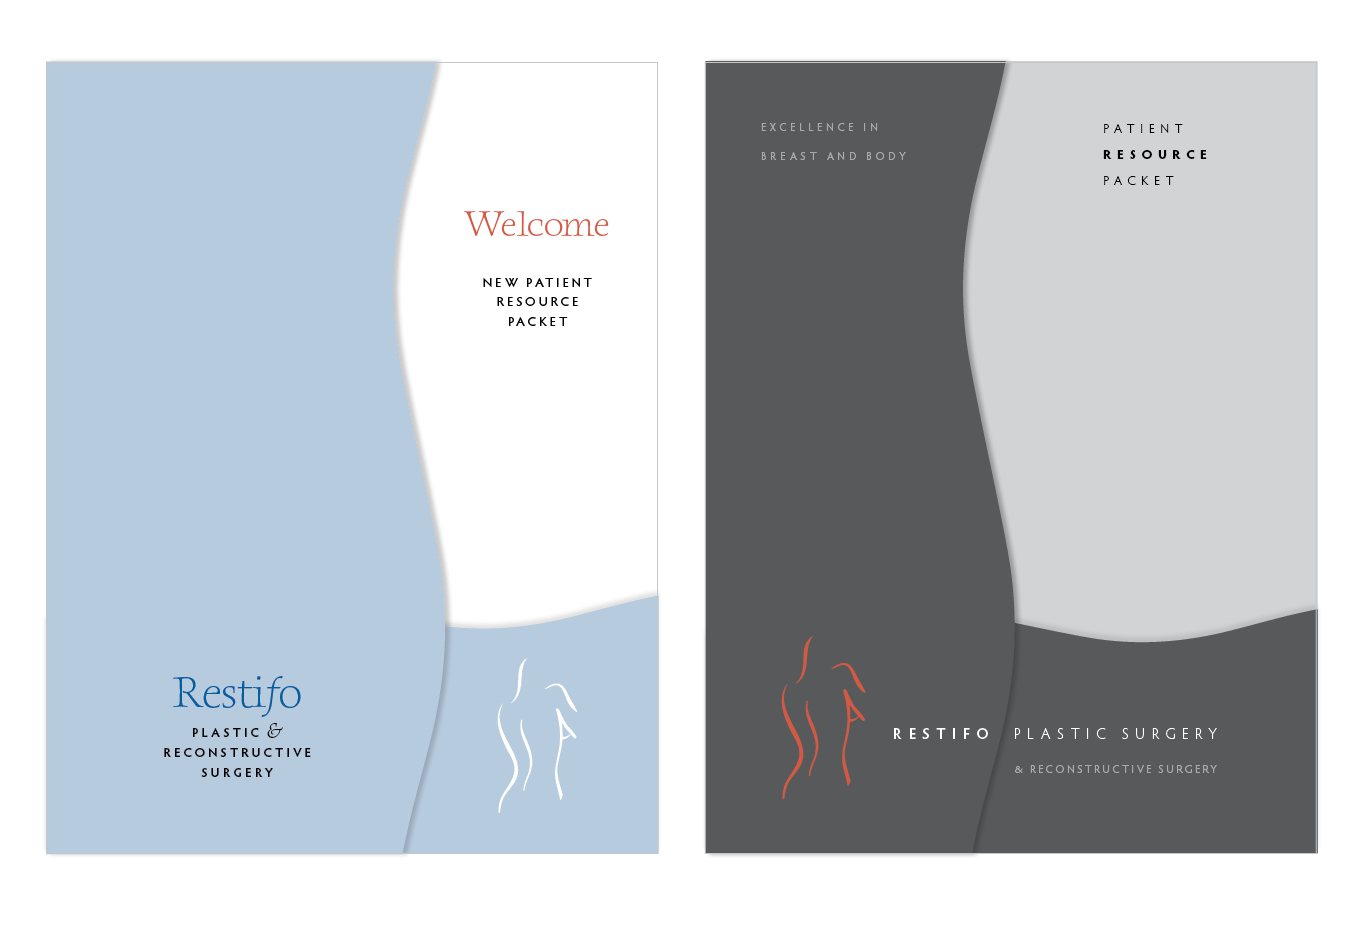 GBD Works Tutorial: Steps in the Creative Process: Restifo Plastic Surgery Folder and Brochure [Step 4]